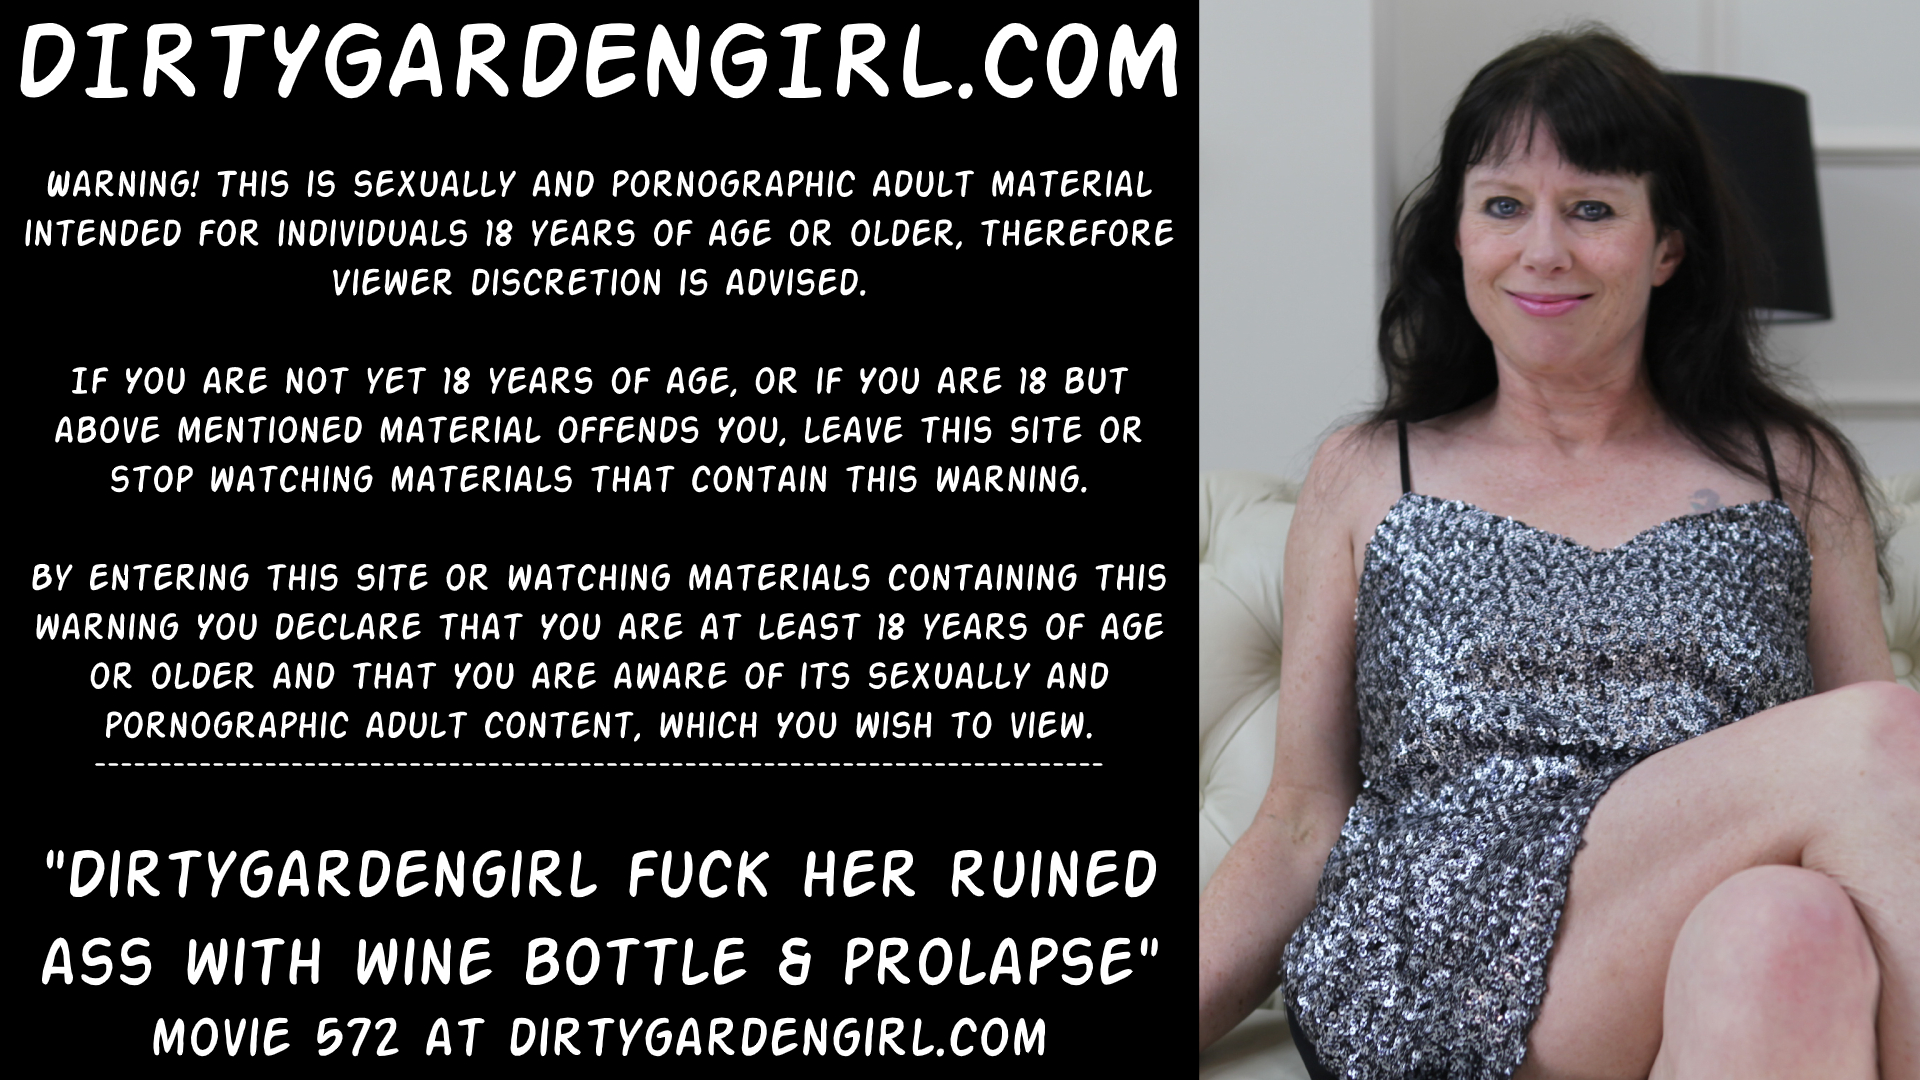 Dirtygardengirl fucking her ruined ass with wine bottle & prolapse